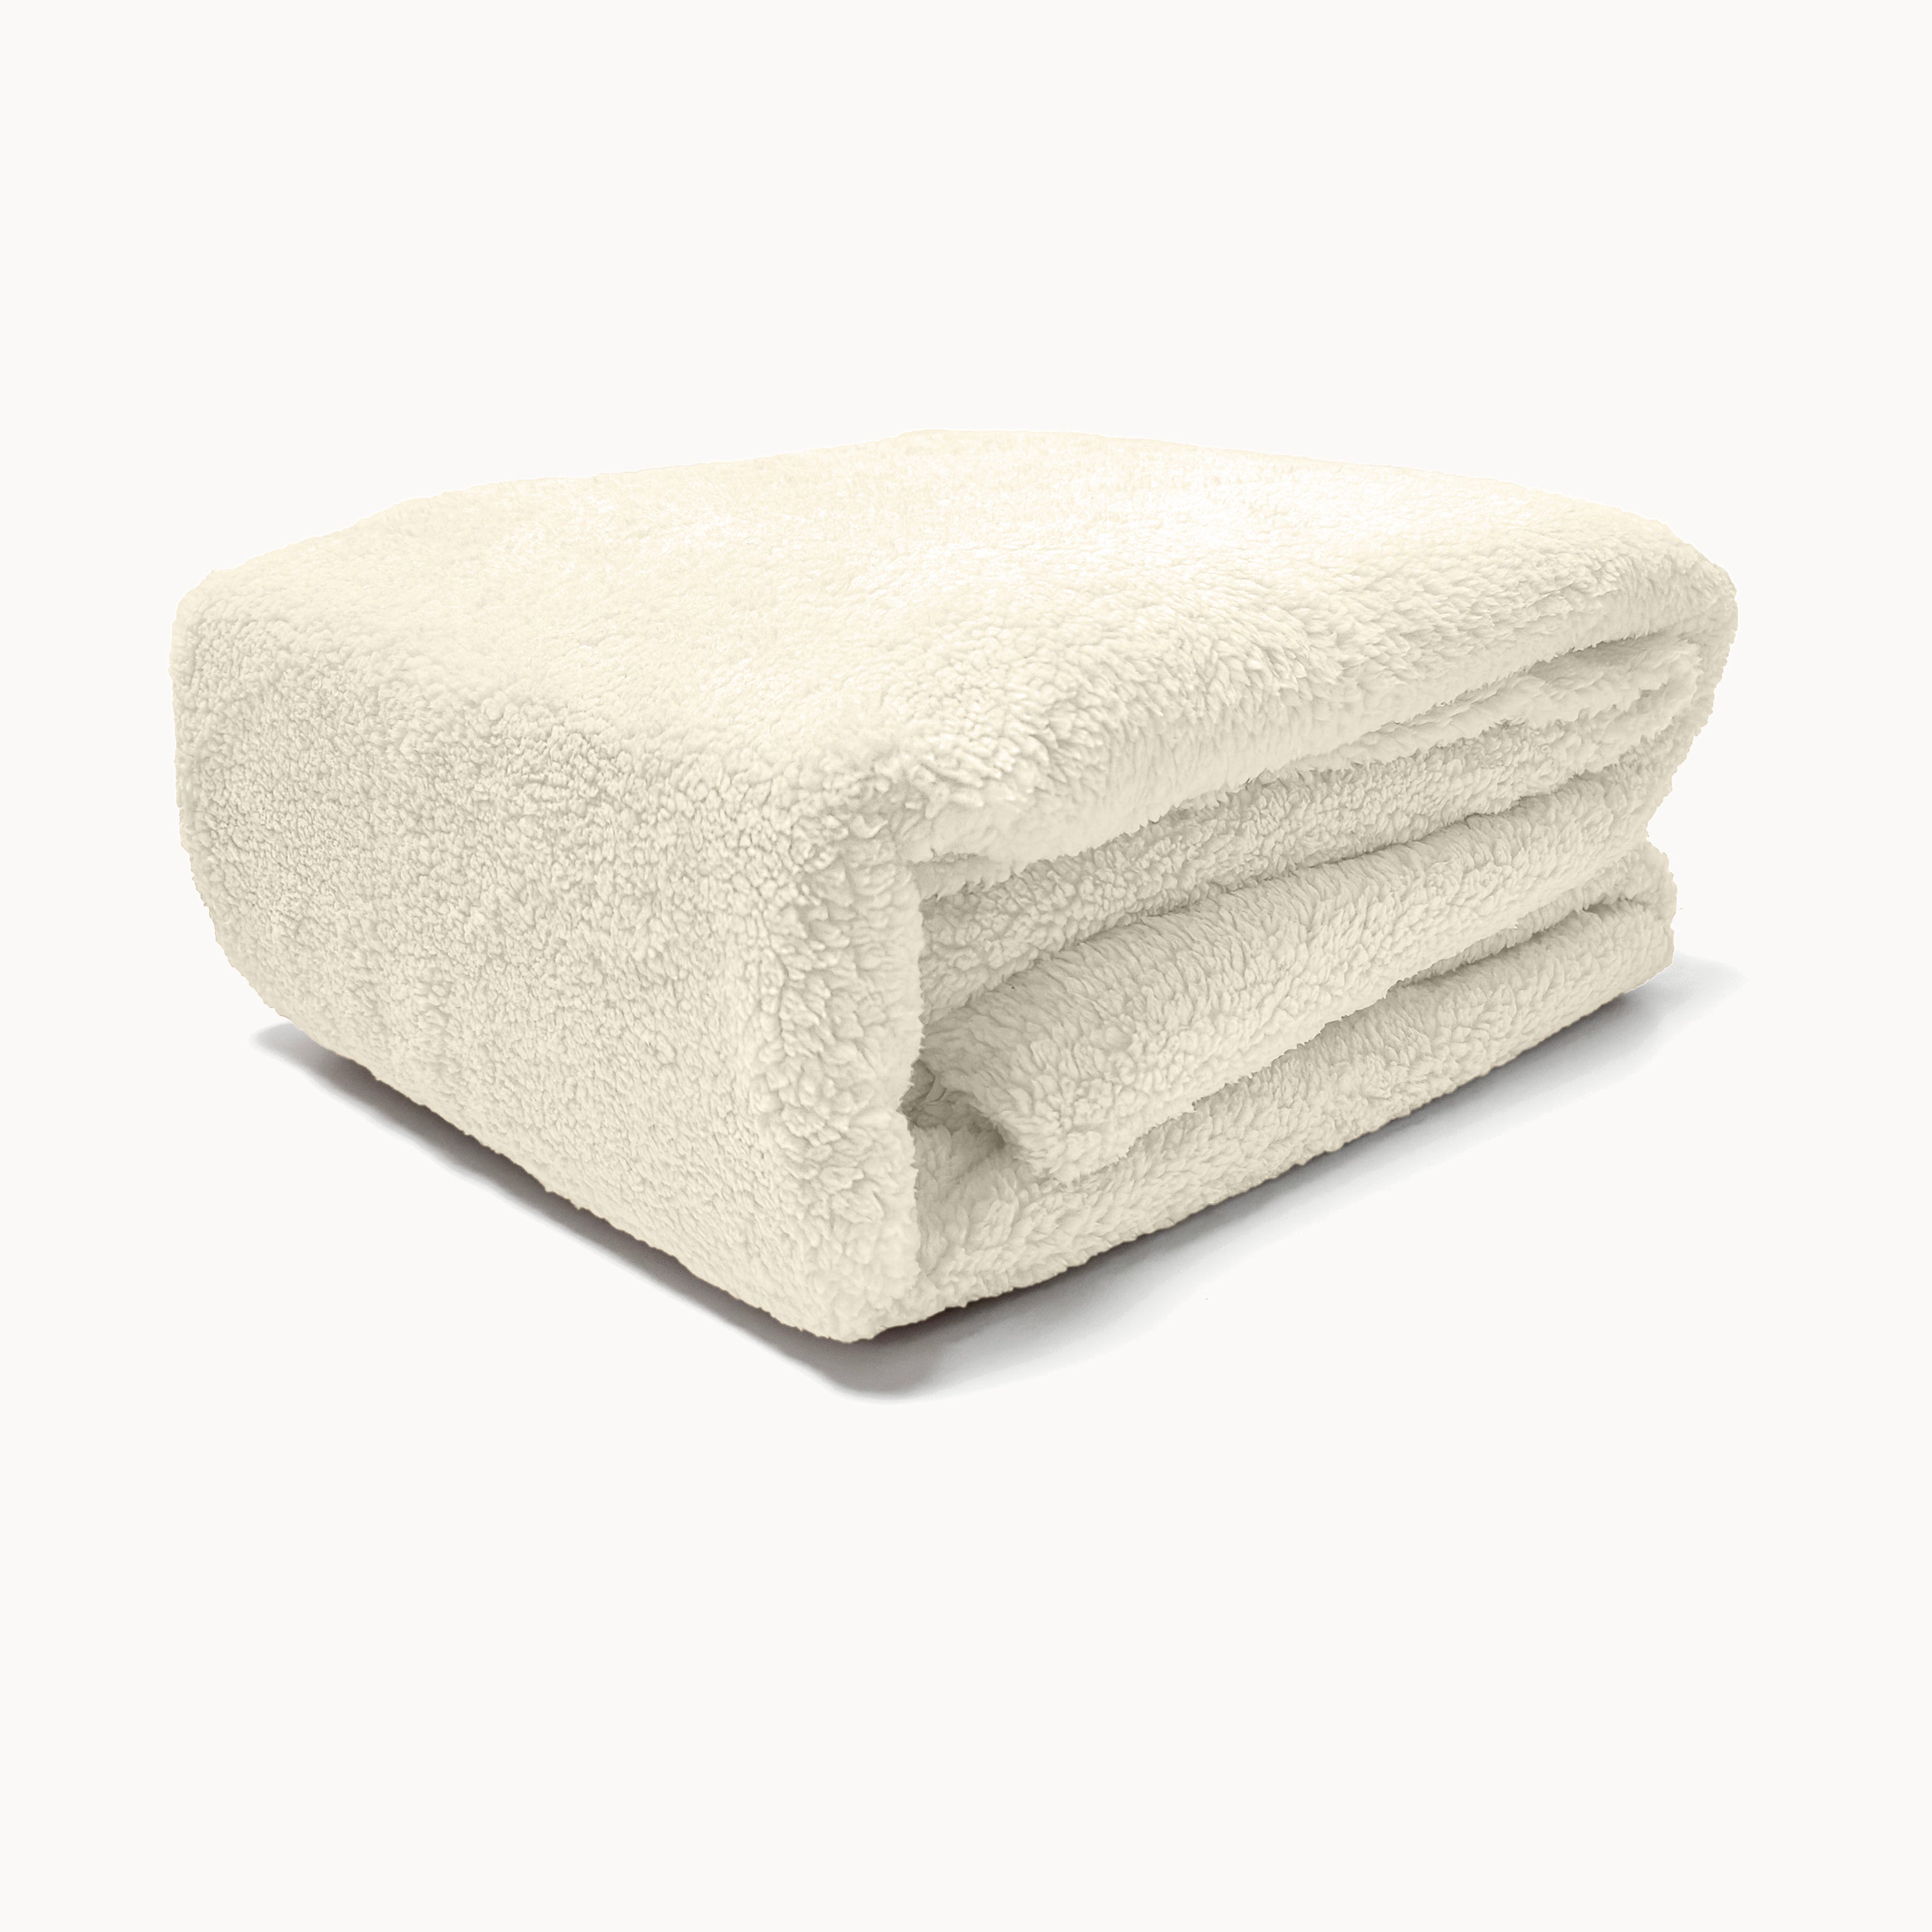 Mattress Fitted Sheet Teddy - Cappuccino White